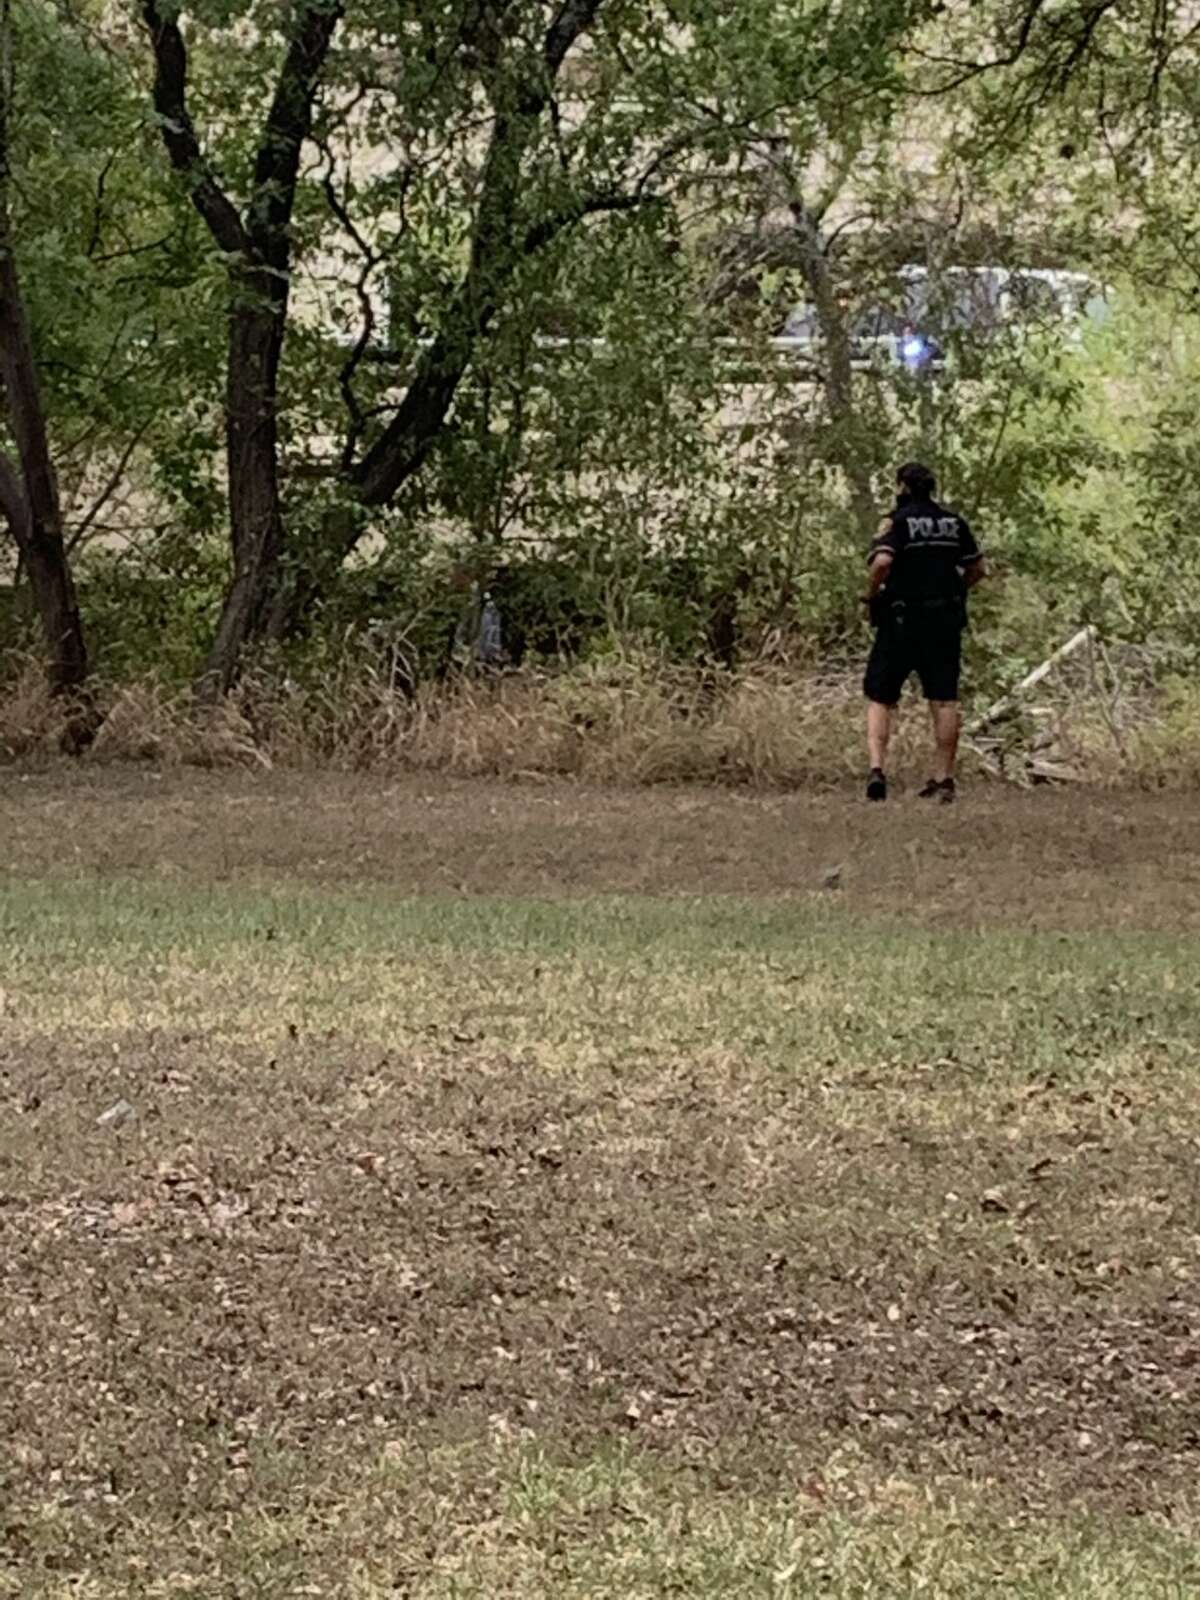 San Antonio police are trying to determine if foul play was involved after a body was found next to Salado Creek Tuesday morning.